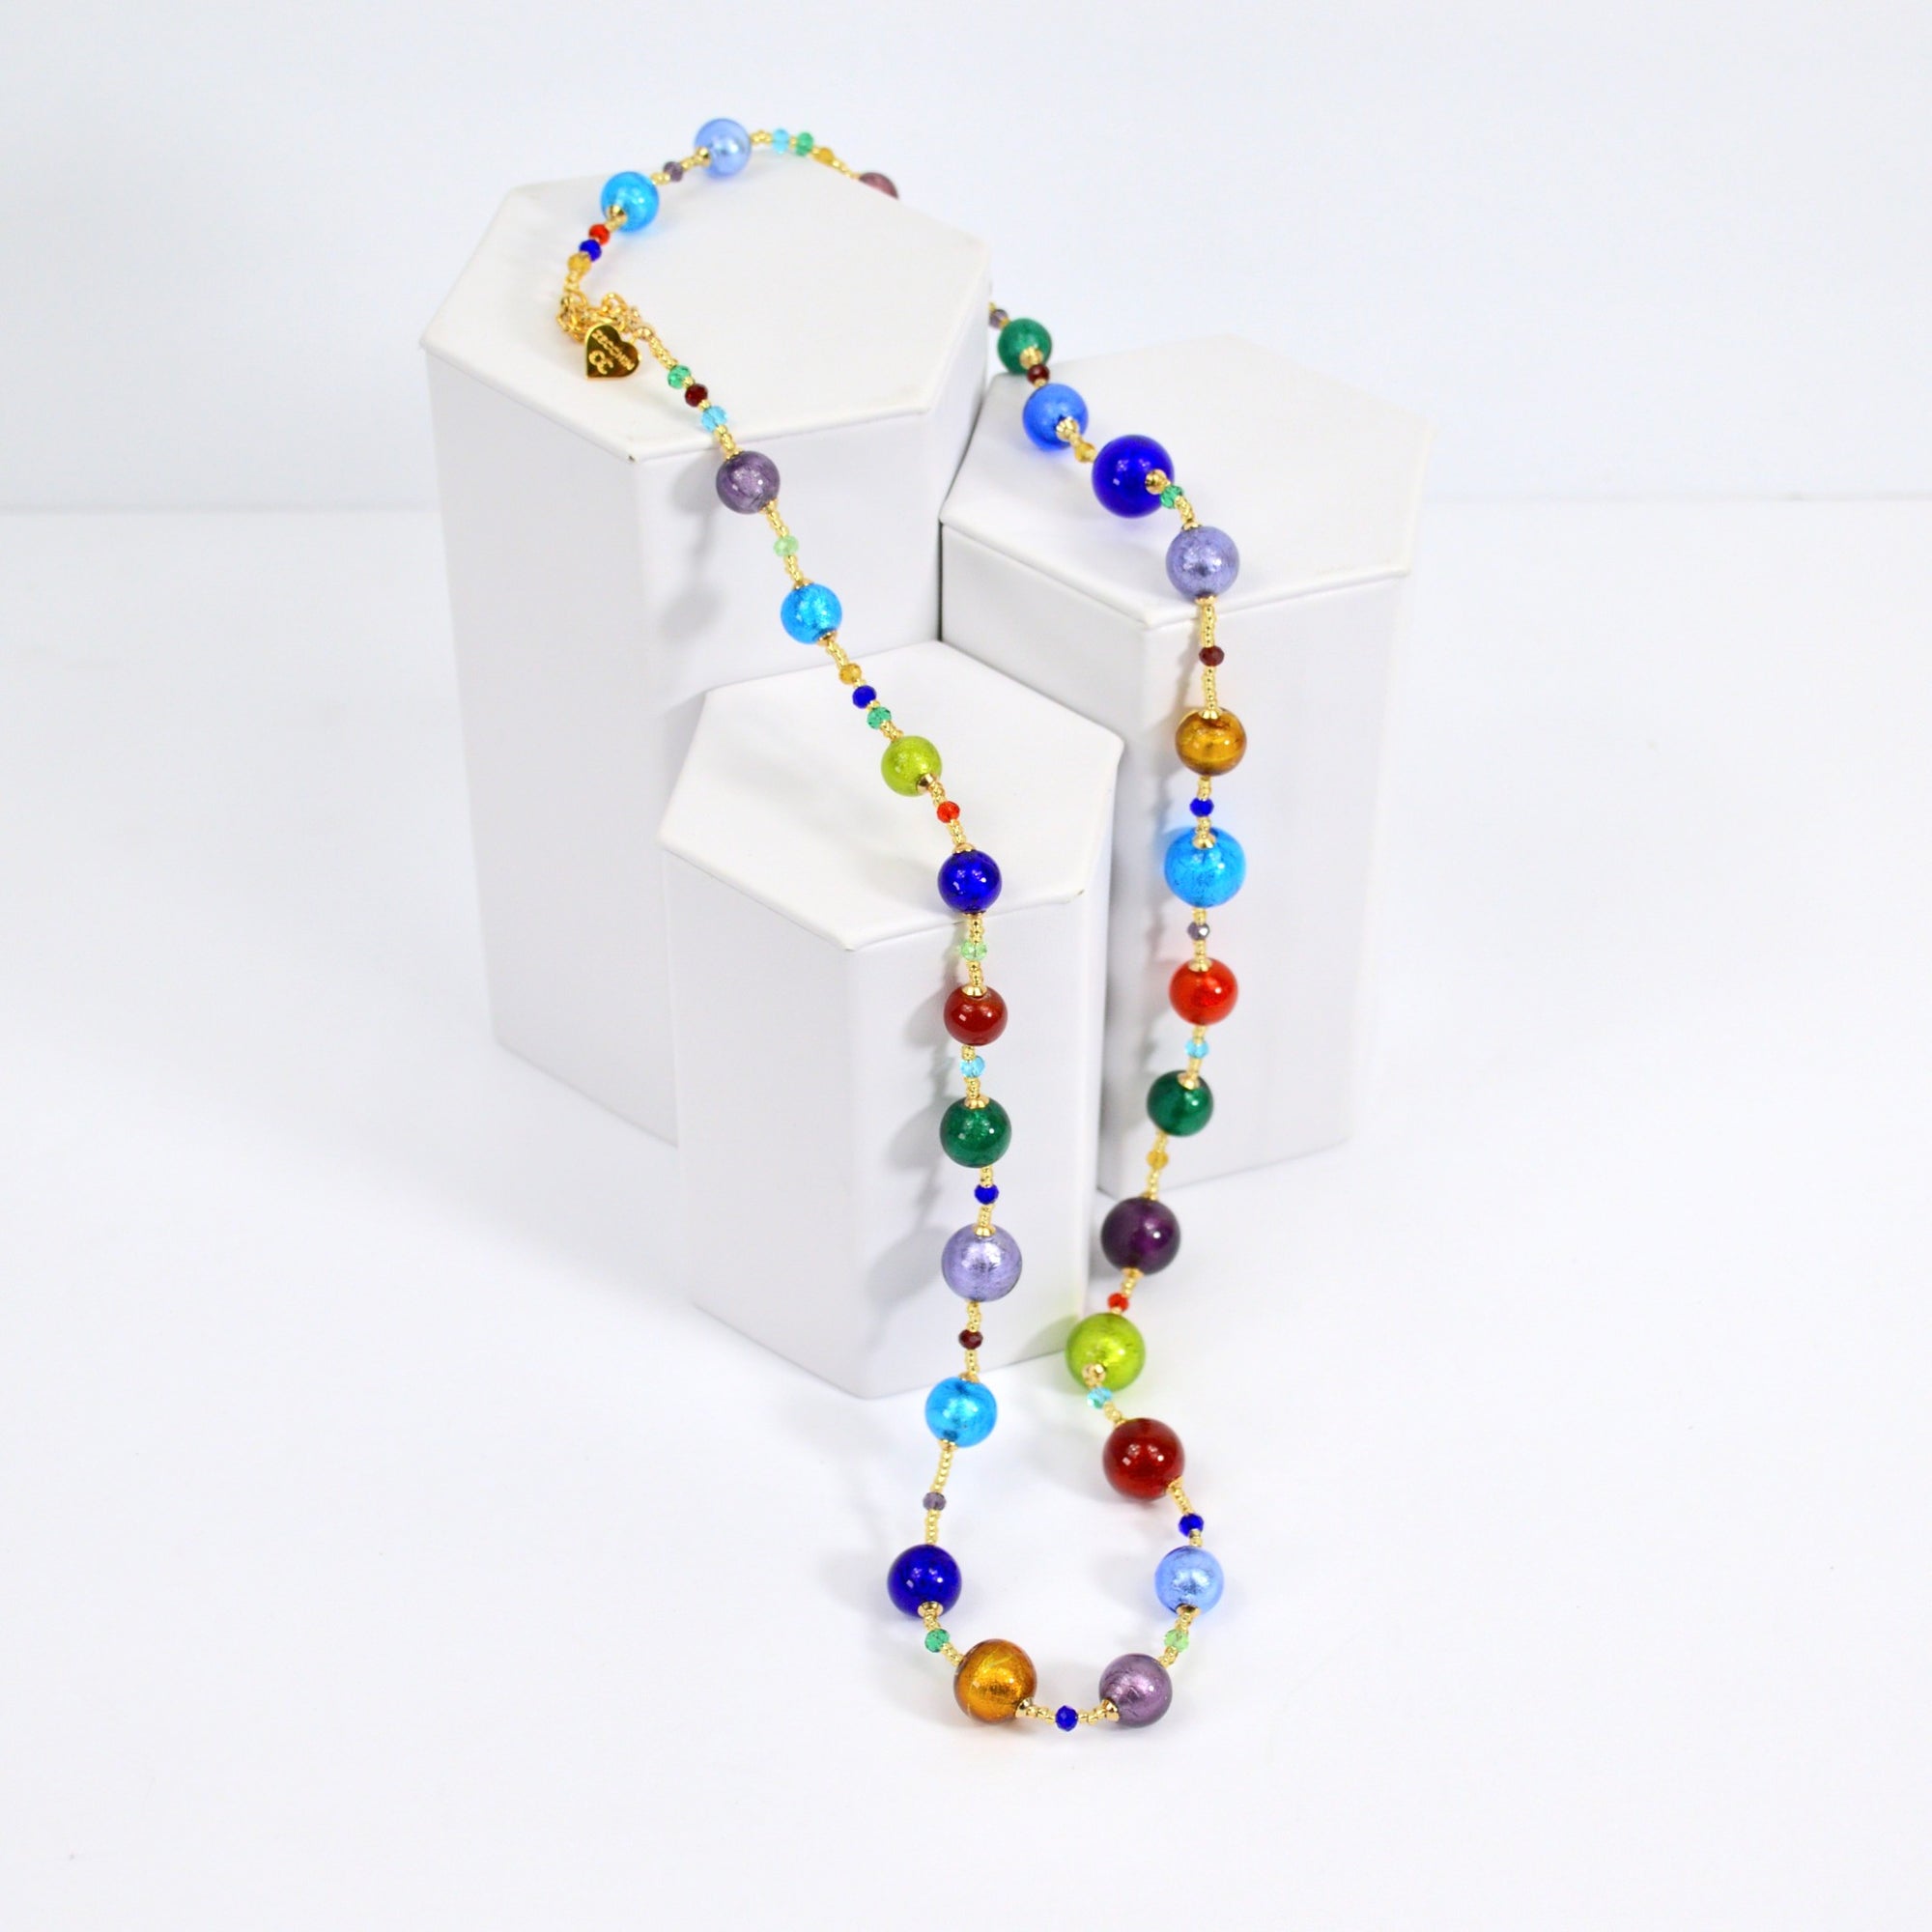 Roma Murano Glass Beaded Necklace, Multi-color glass beads, Made in Italy - My Italian Decor